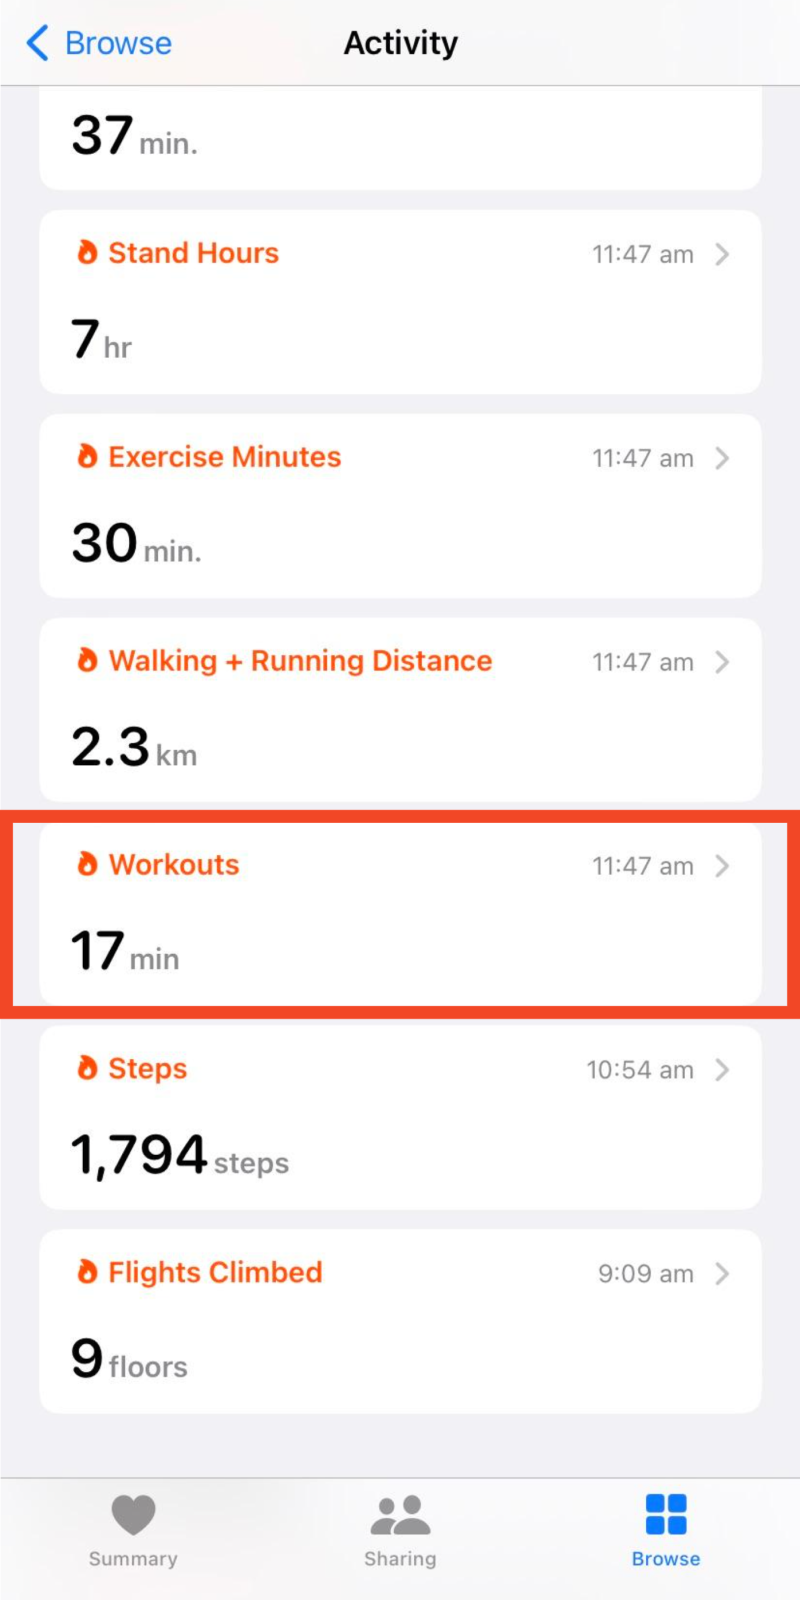 Workouts subcategory under the activity section under the Health app on iPhone